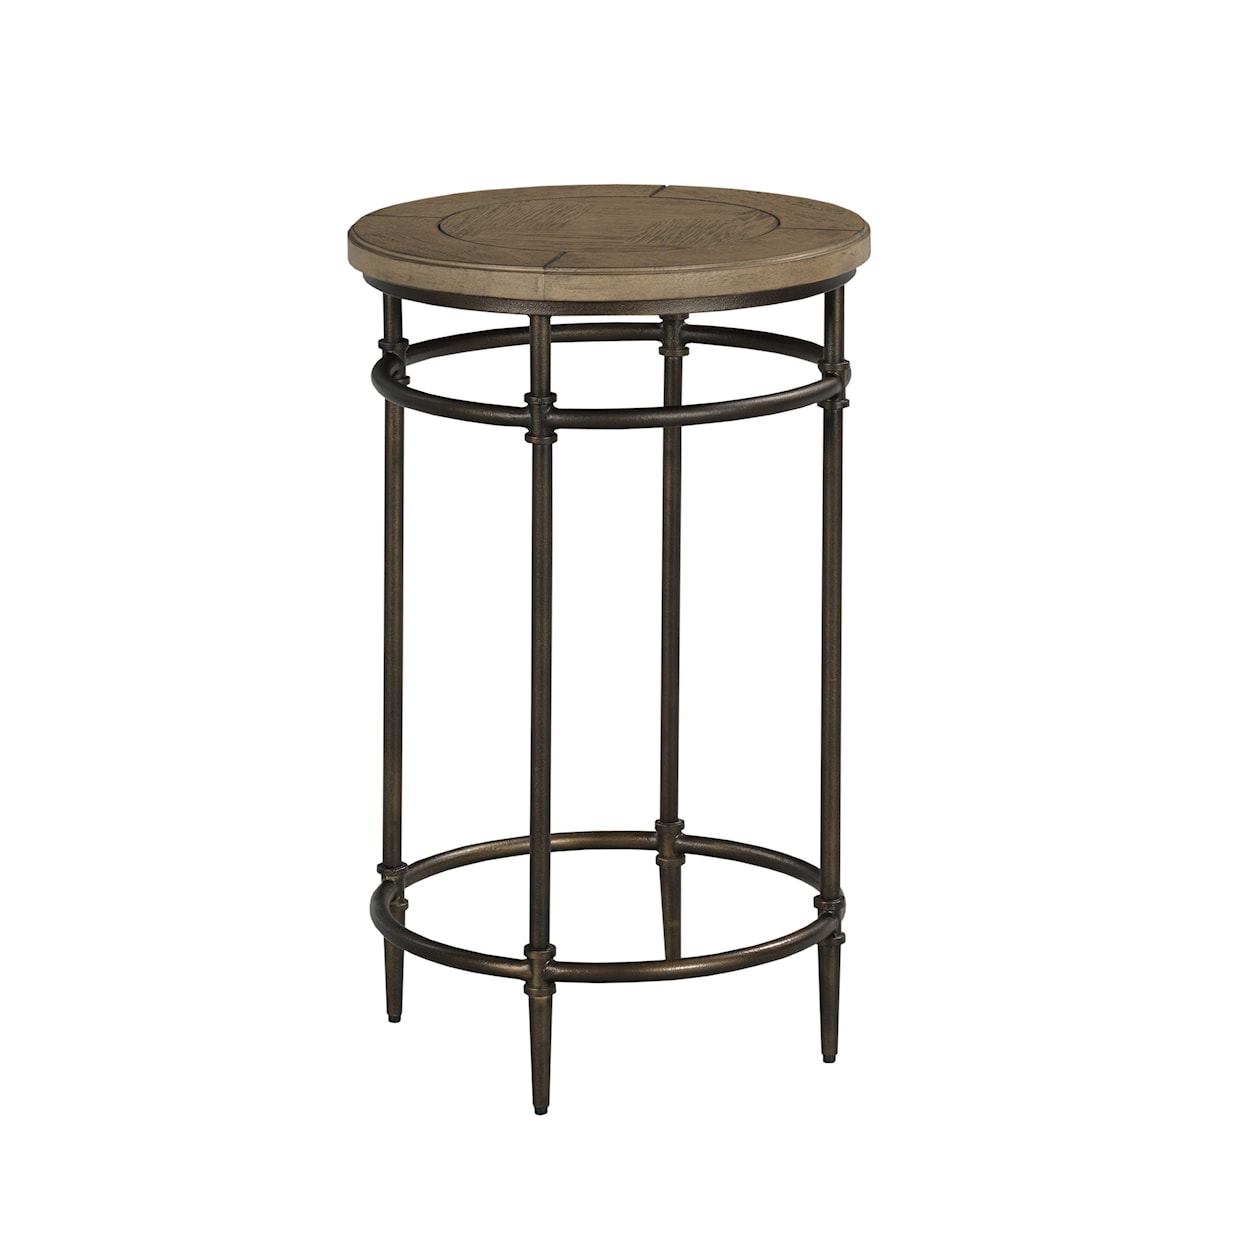 Dimensions Crossroads Round Chairside Table